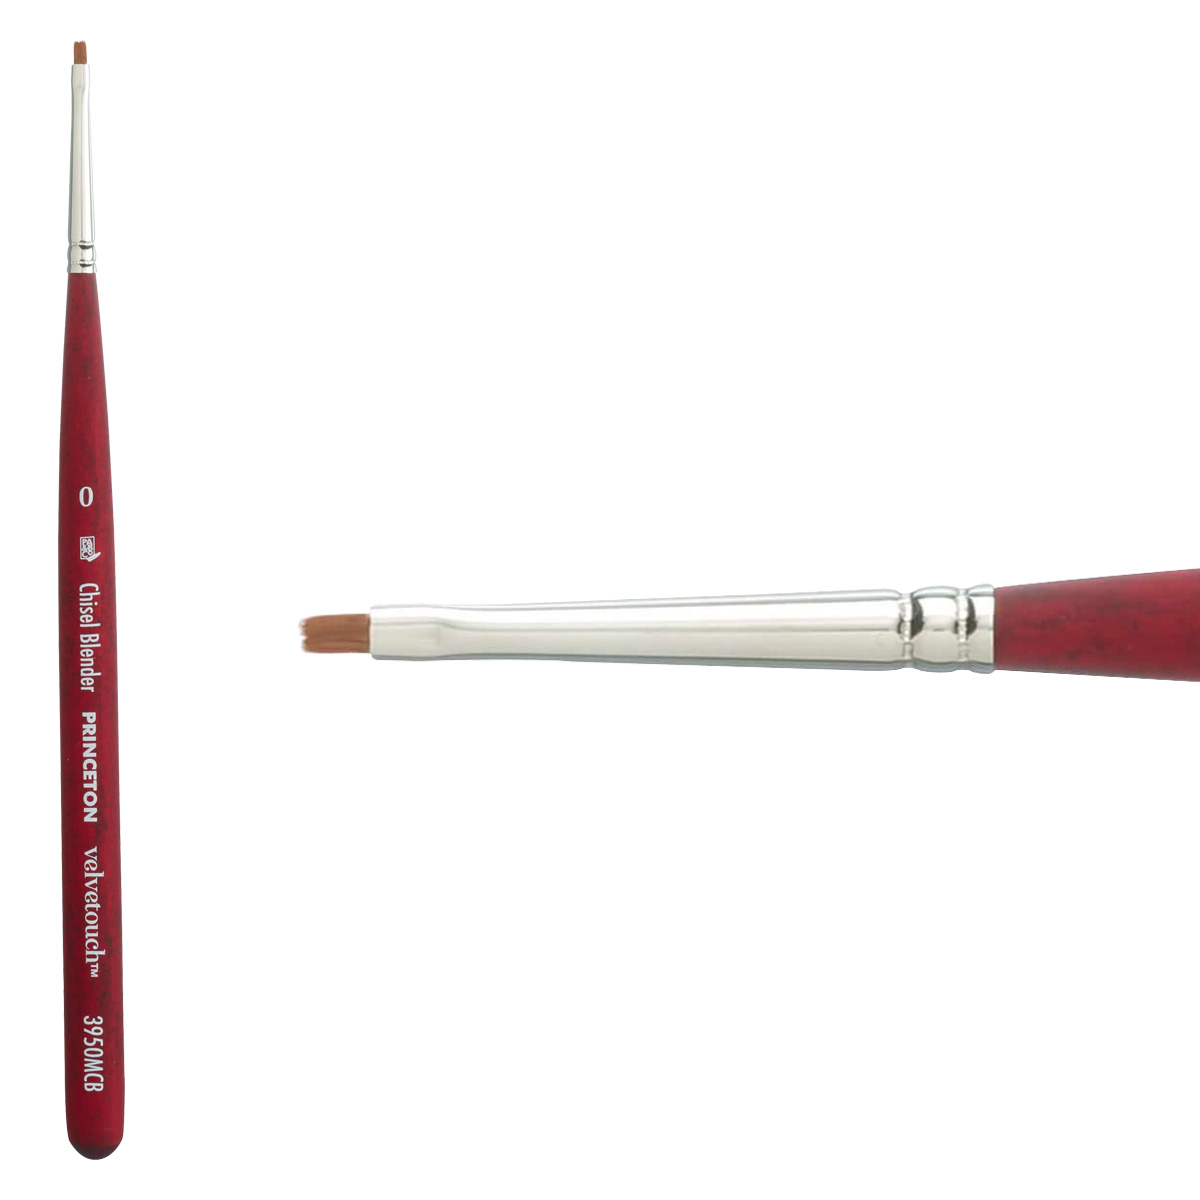 Princeton Velvetouch™ Series 3900 Synthetic Blend-Brushes